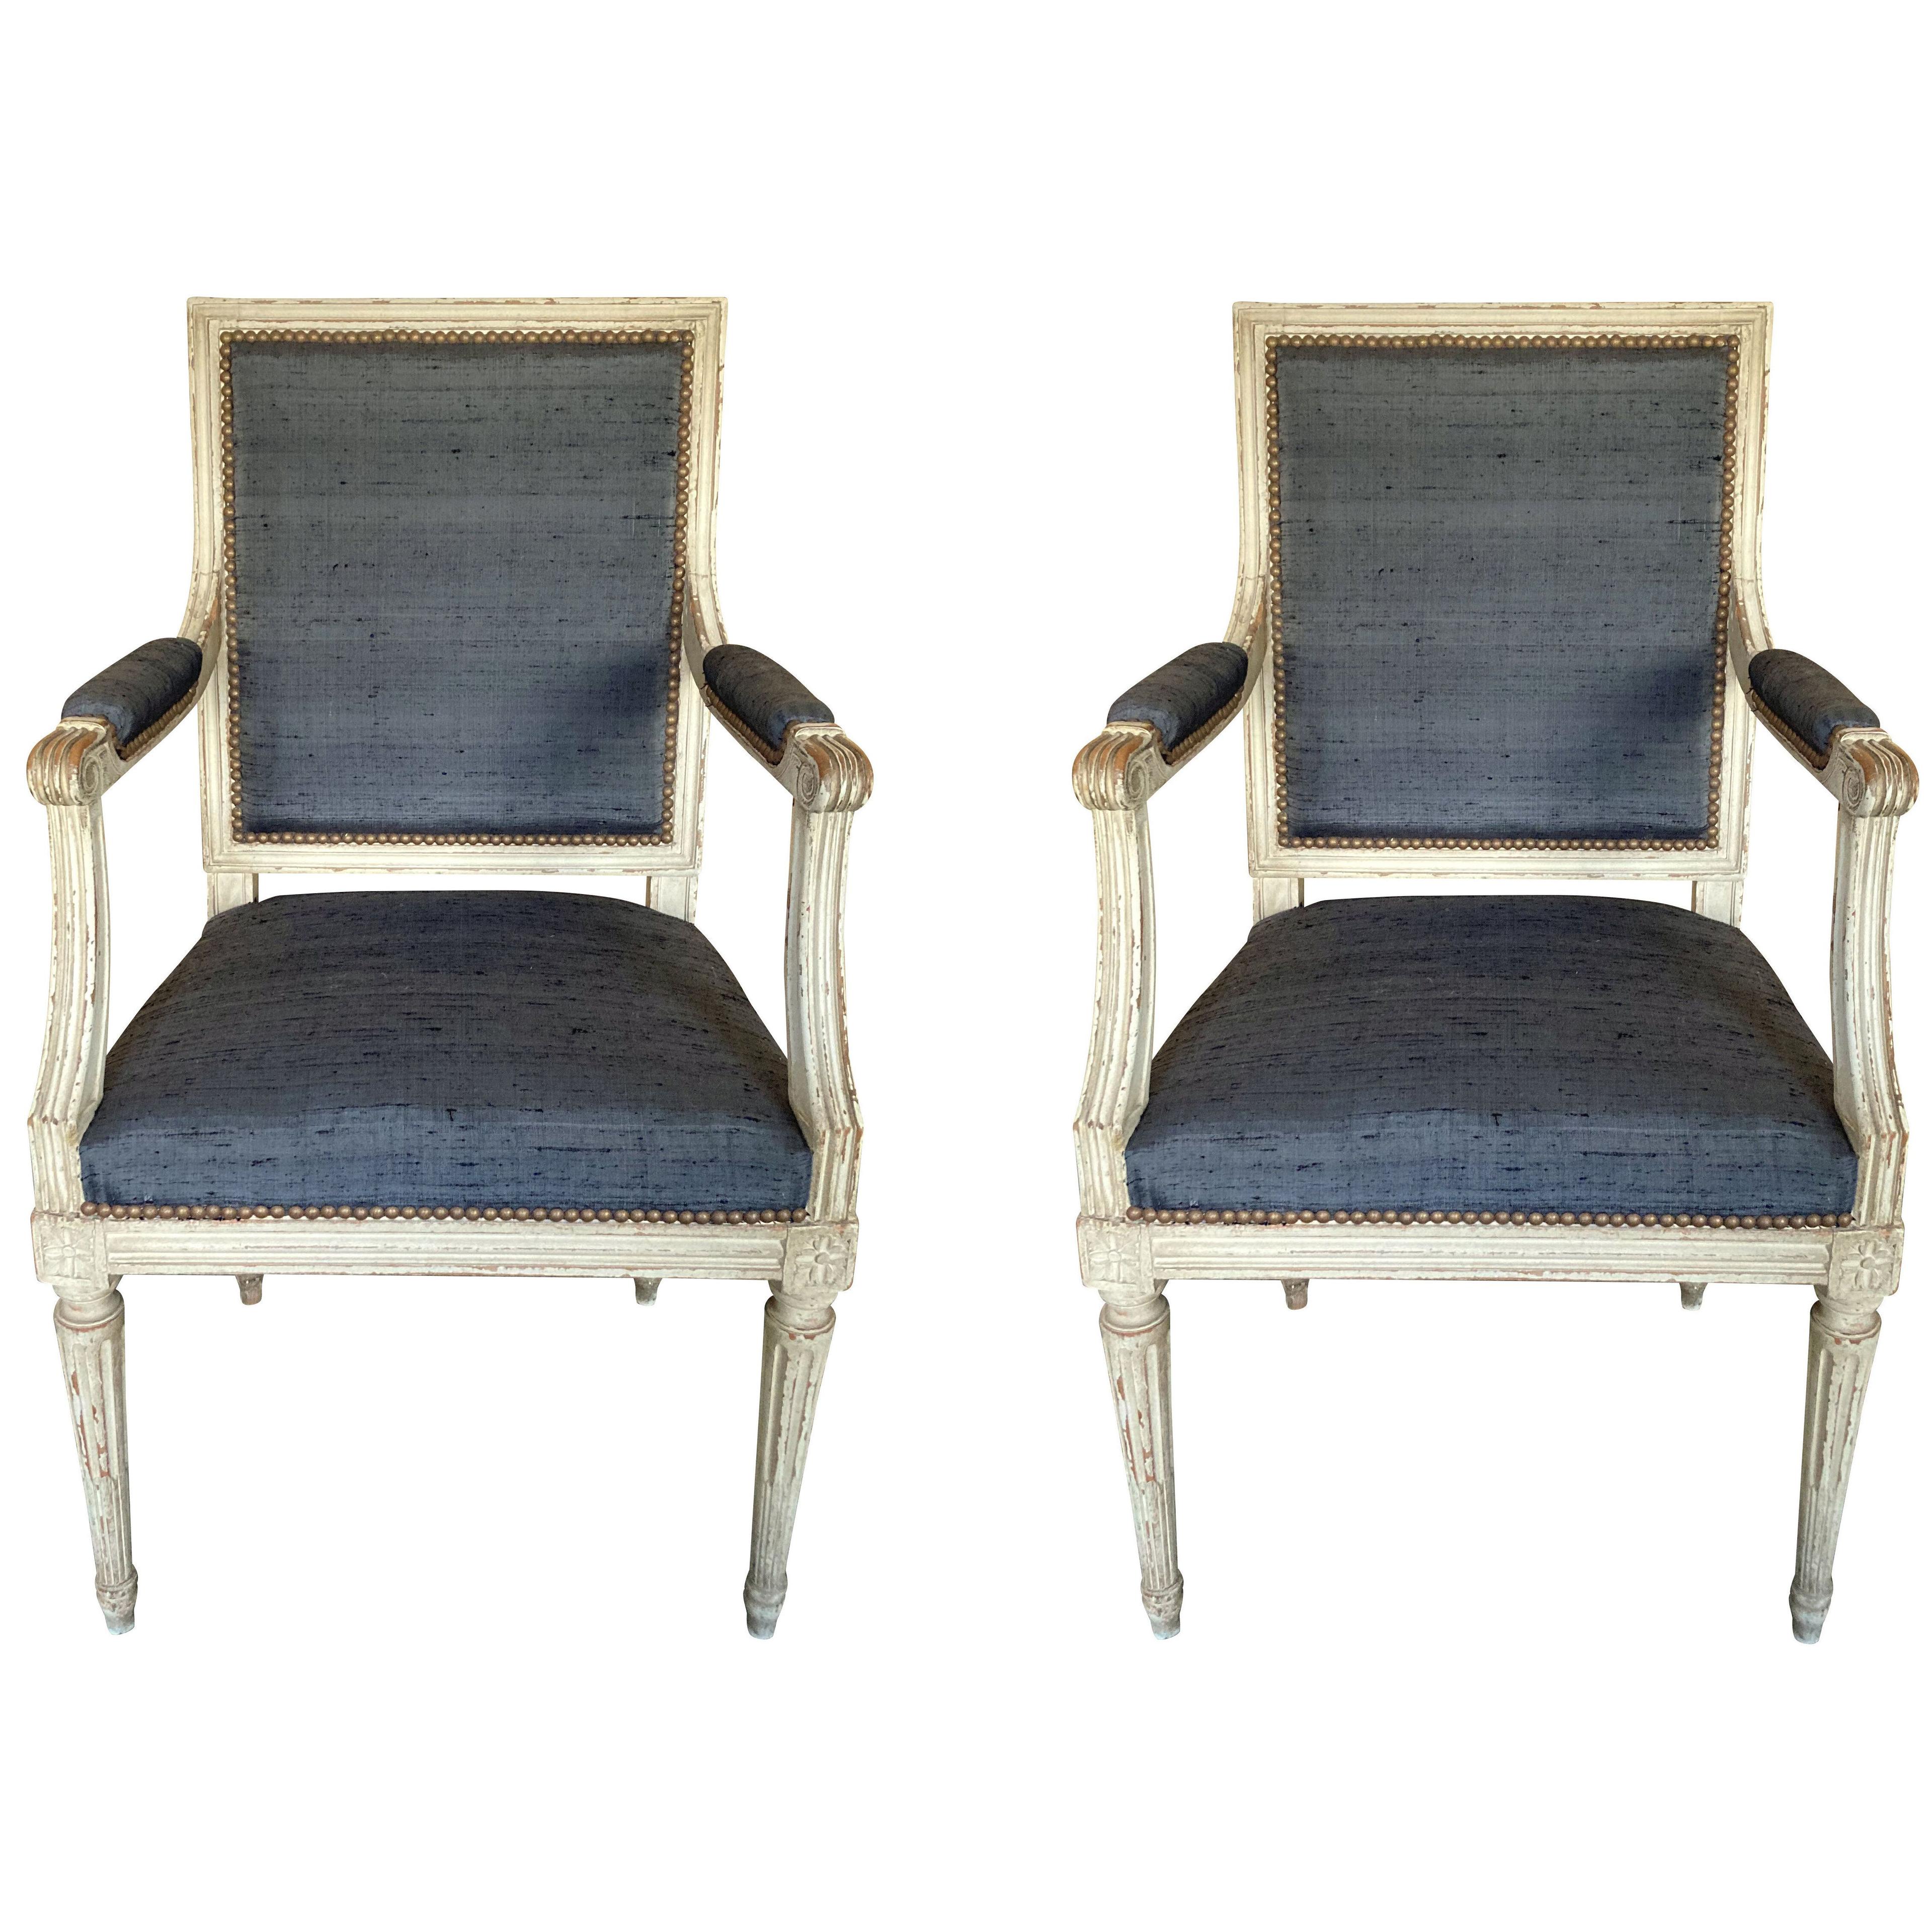 A PAIR OF PAINTED LOUIS XVI STYLE ARMCHAIRS IN CHARCOAL SILK